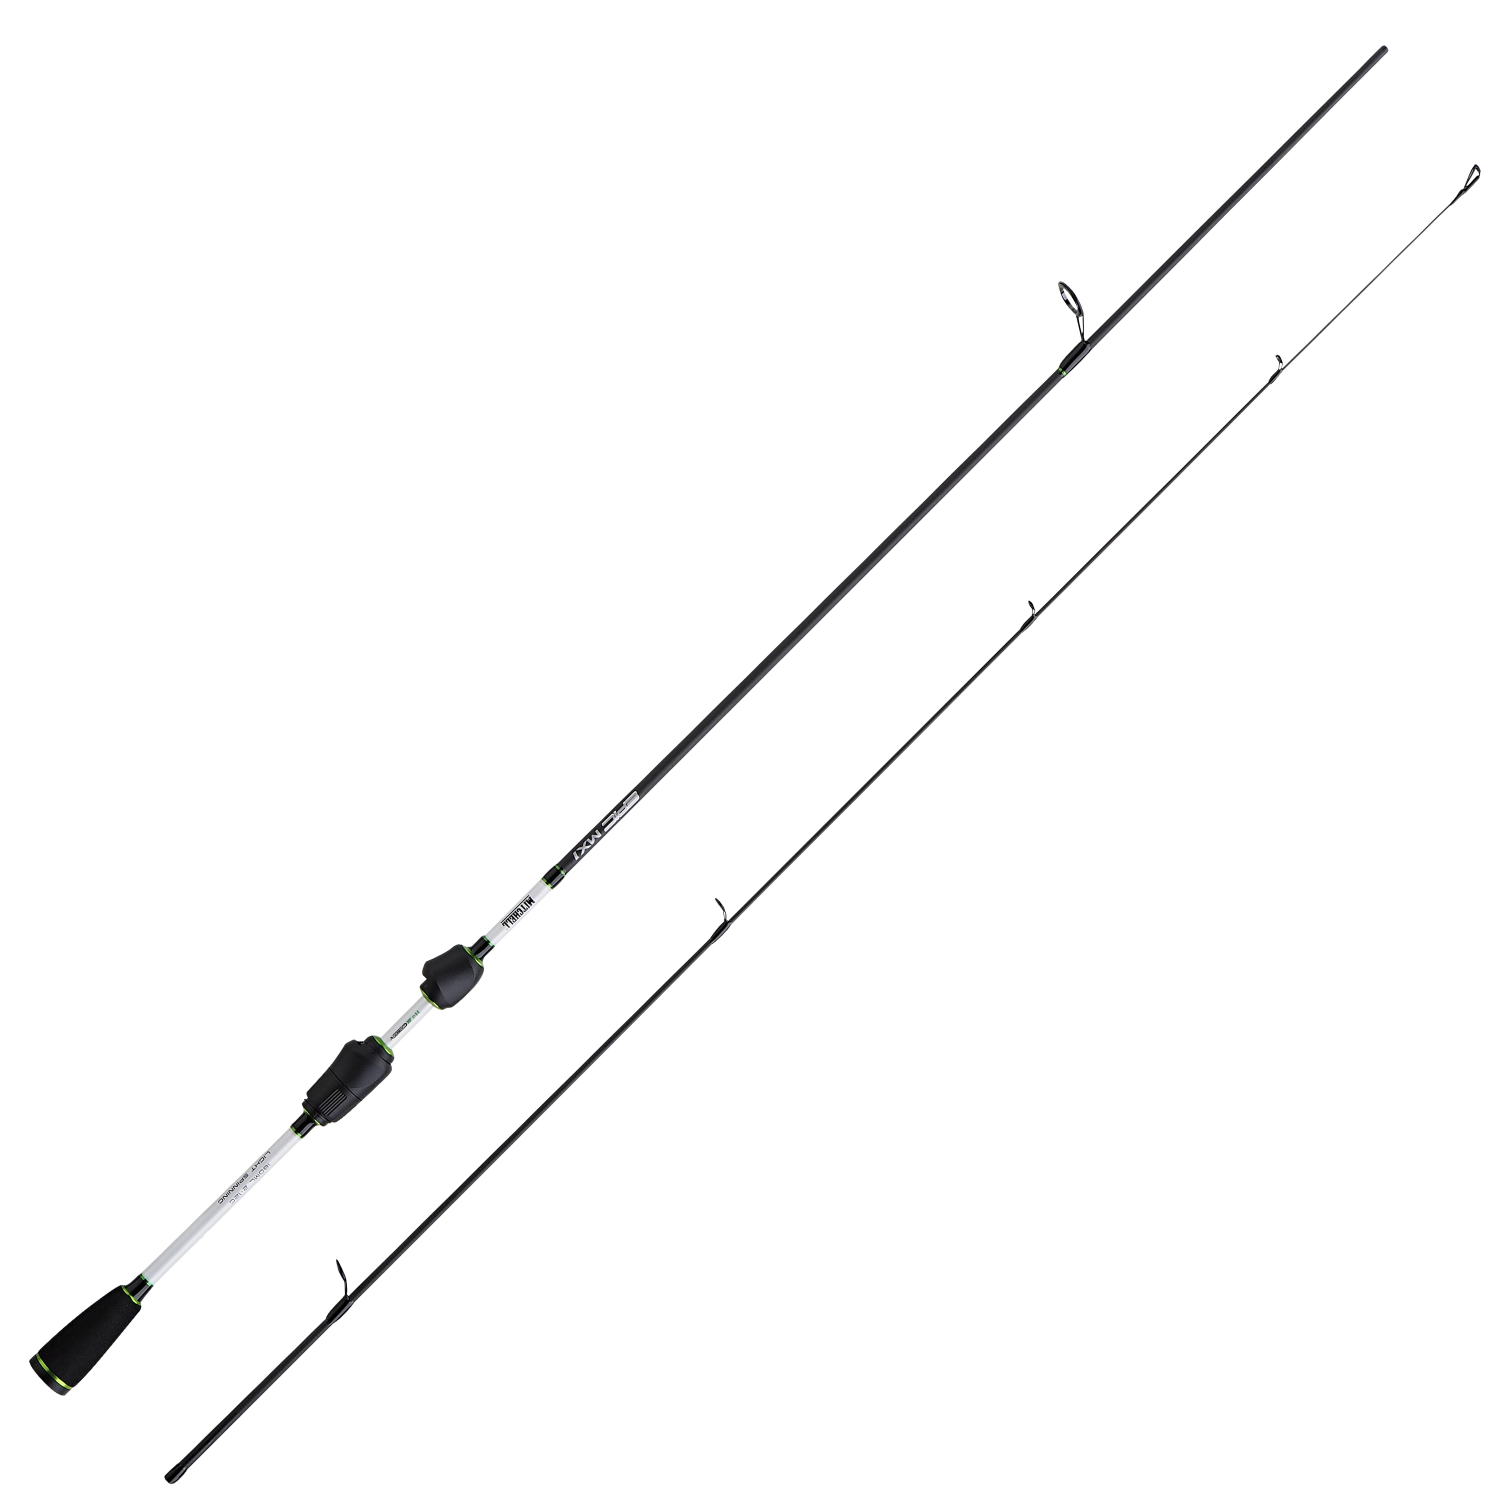 https://images.askari-sport.com/en/product/1/large/mitchell-trout-rod-epic-mx1-spinning.jpg